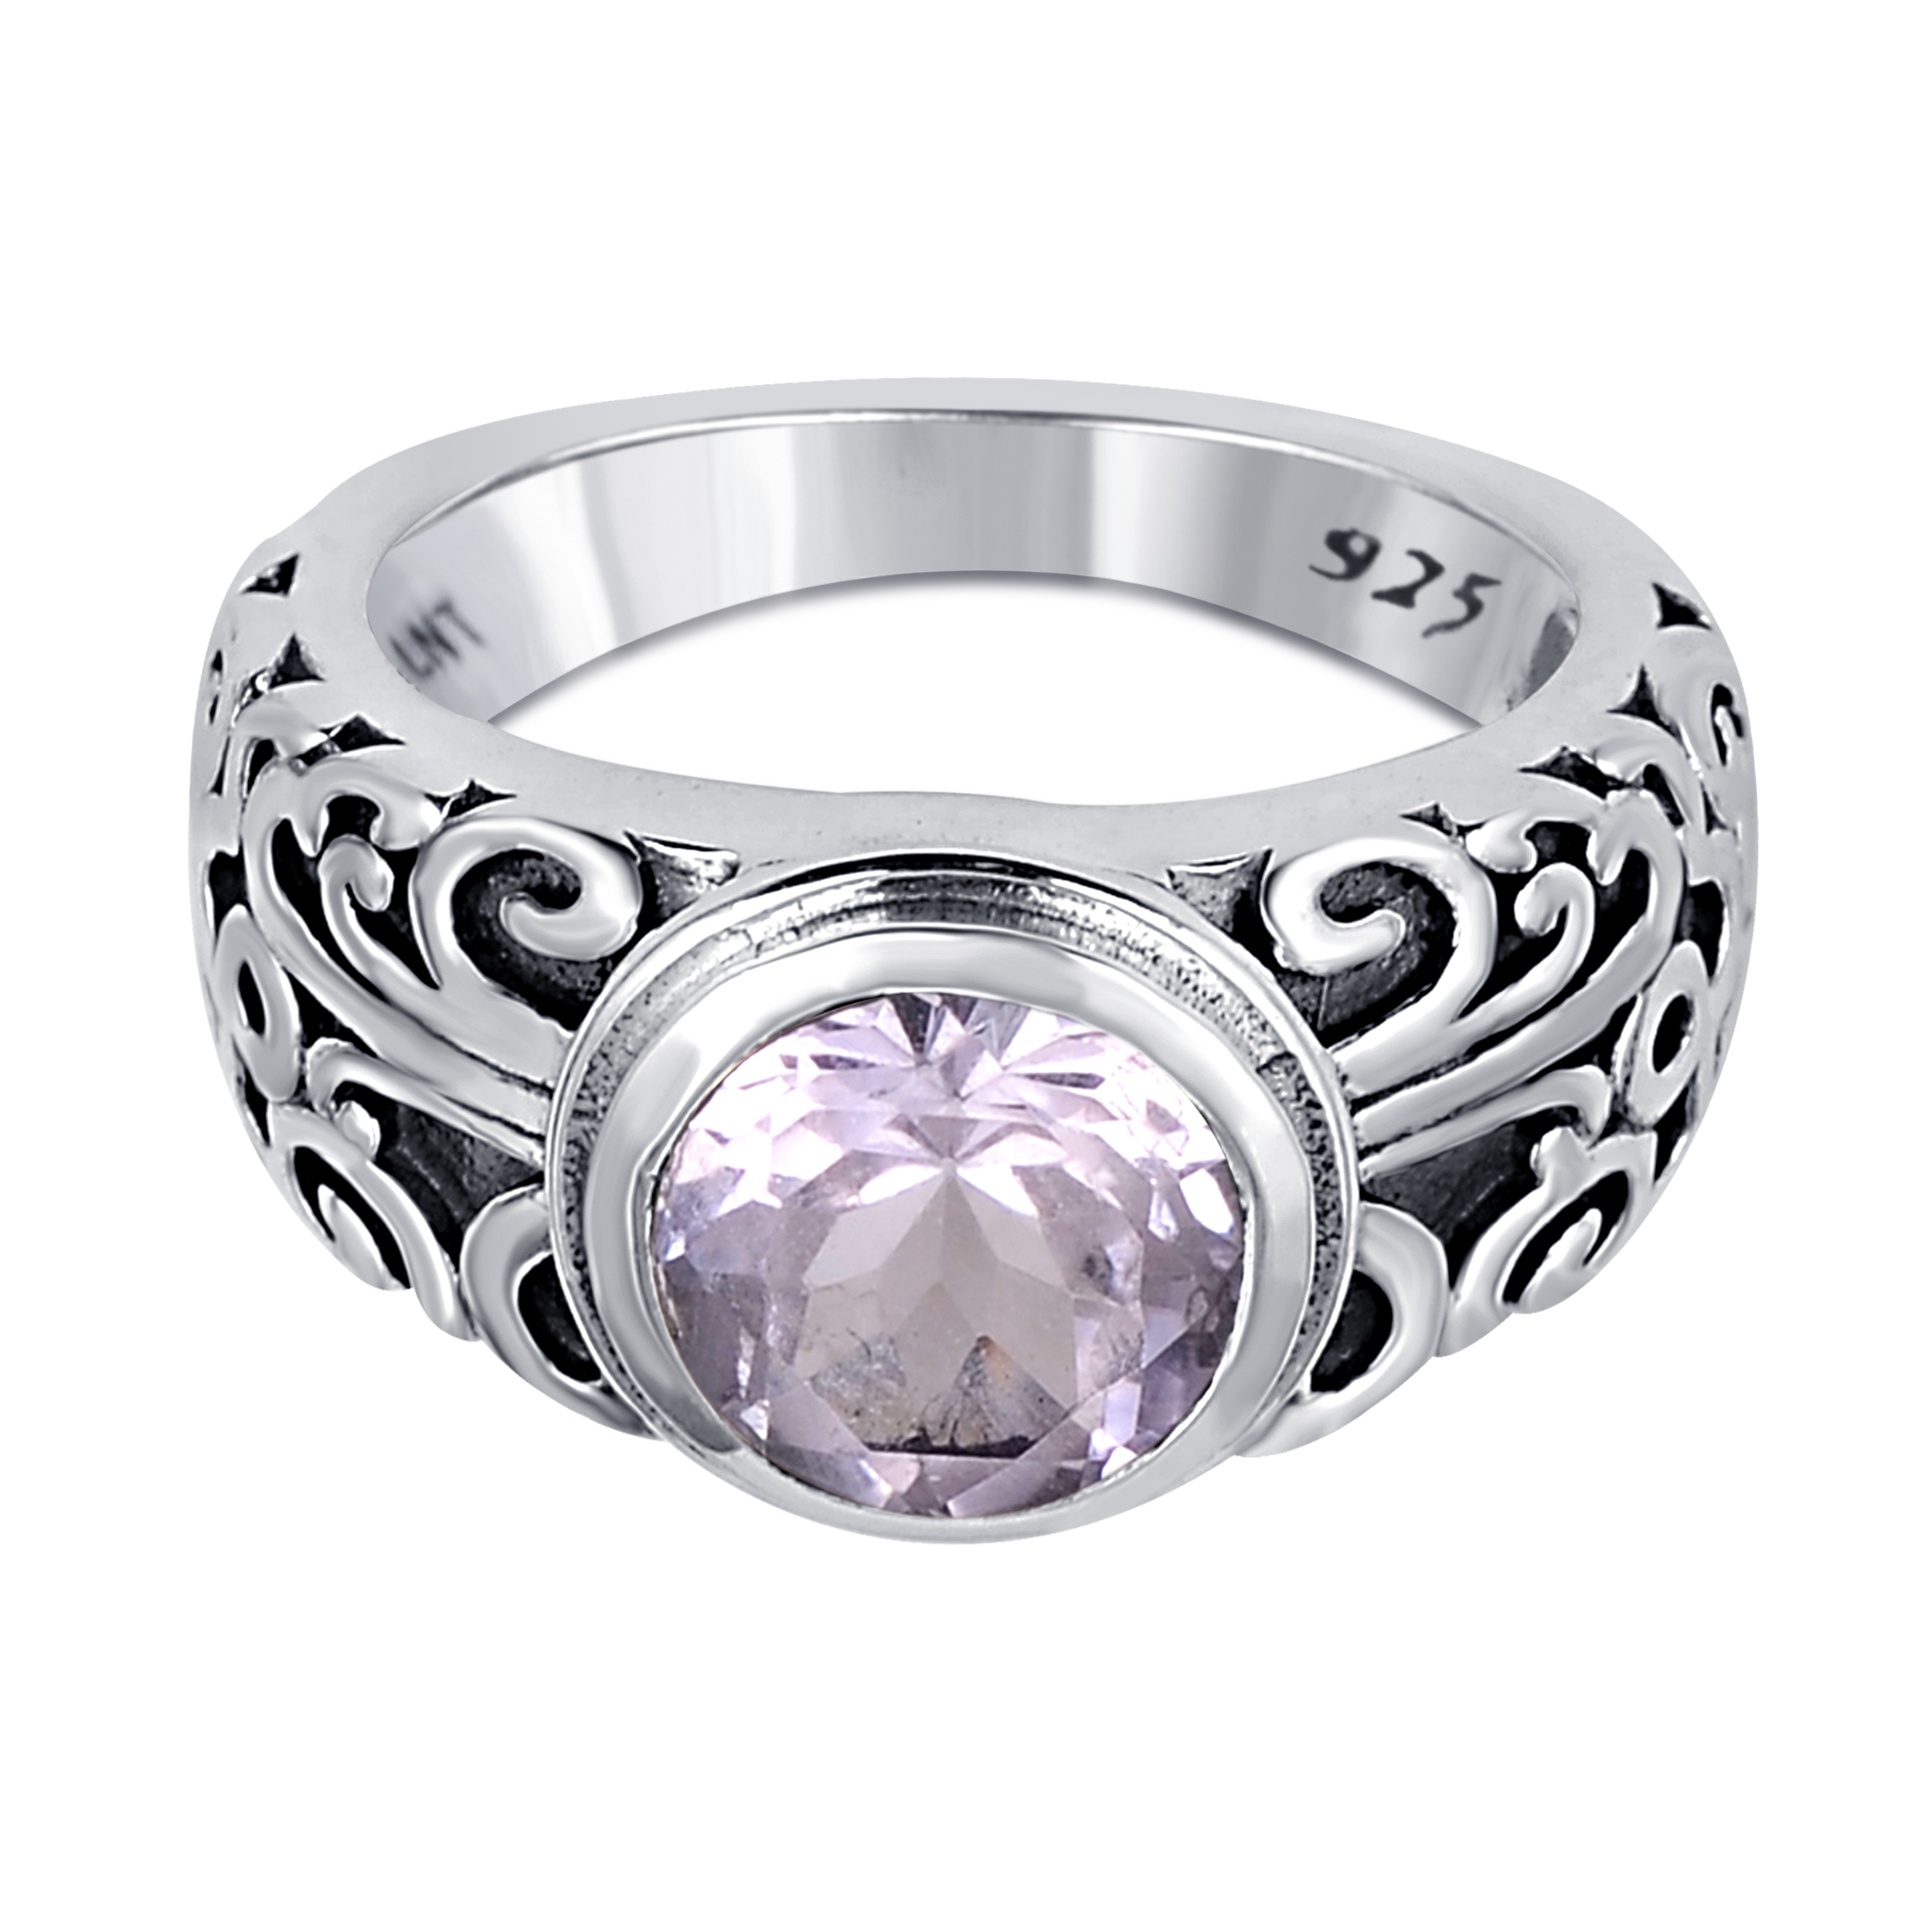 Gorgeous Filigree Vintage 1.78 Ctw Round Pink Amethyst 925 Sterling Silver Classical Ring For Women By Orchid Jewelry - image 3 of 7